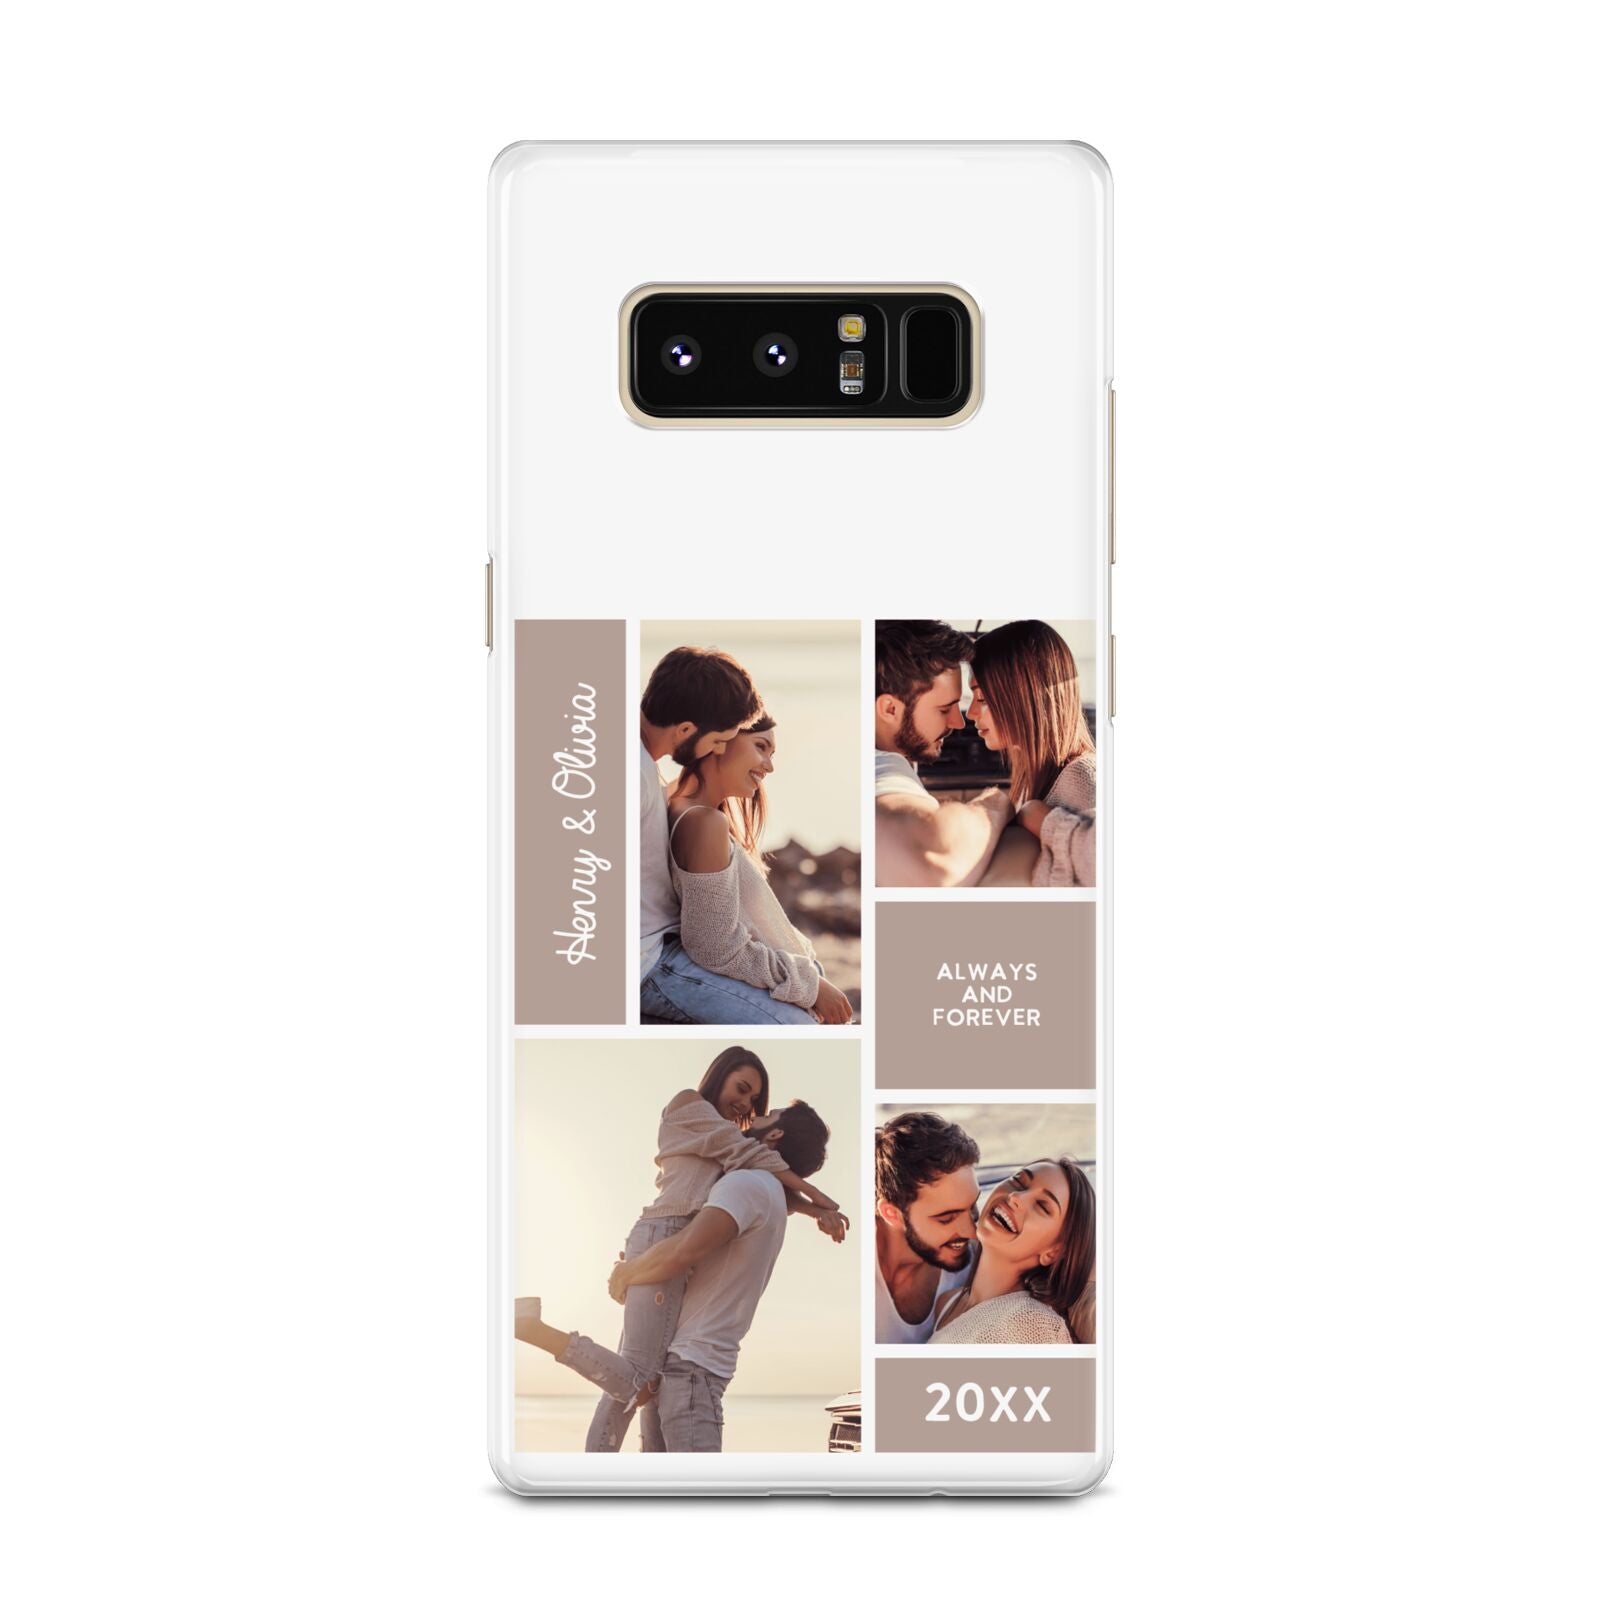 Couples Valentine Photo Collage Personalised Samsung Galaxy Note 8 Case